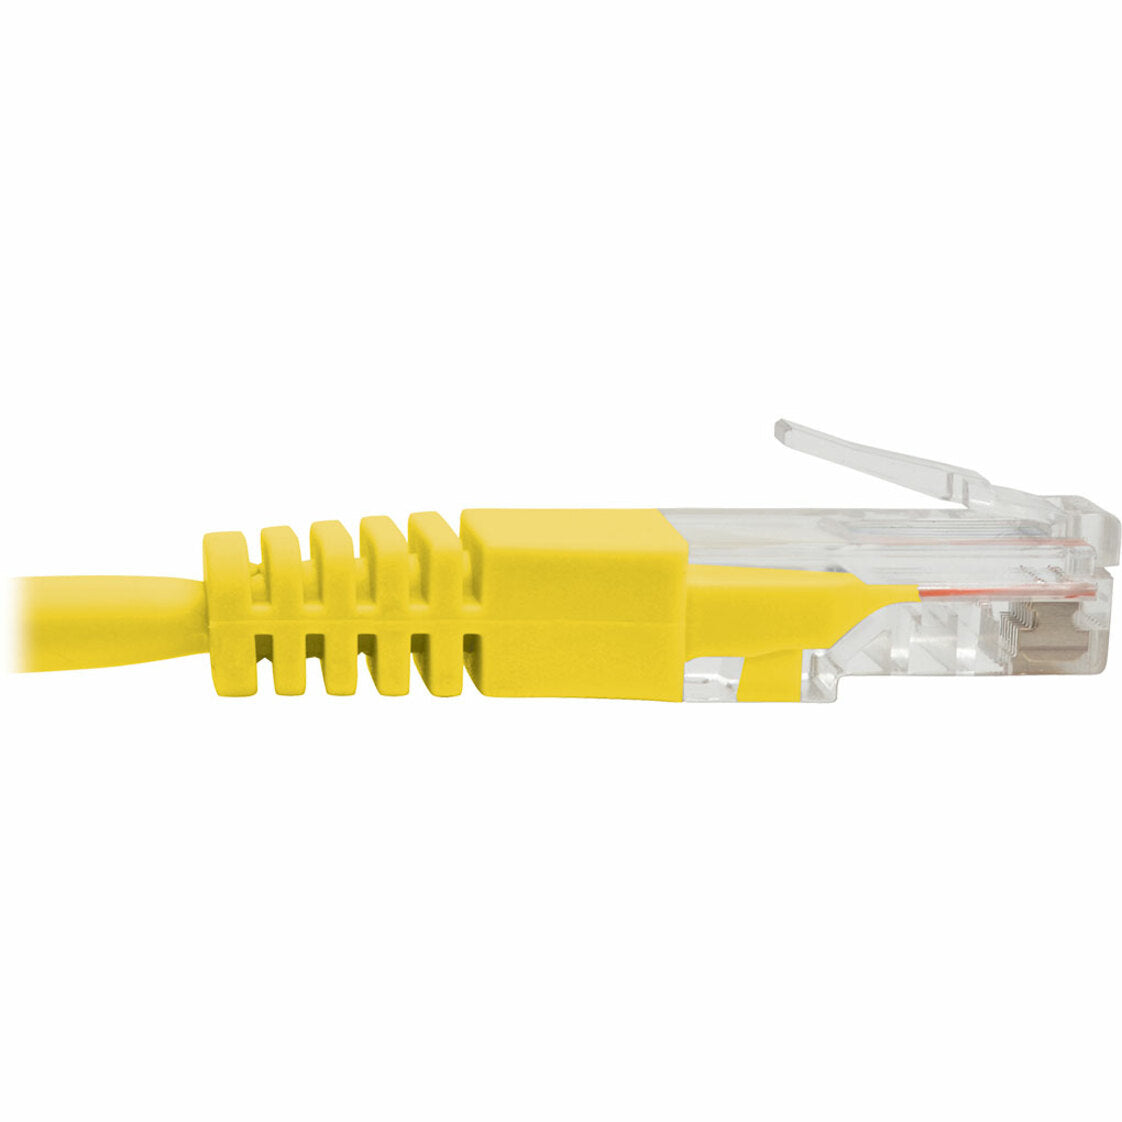 Tripp Lite N002-002-YW Cat5e 350 MHz Molded UTP Patch Cable (RJ45 M/M), Yellow, 2 ft. - High-Speed Data Transfer, Lifetime Warranty